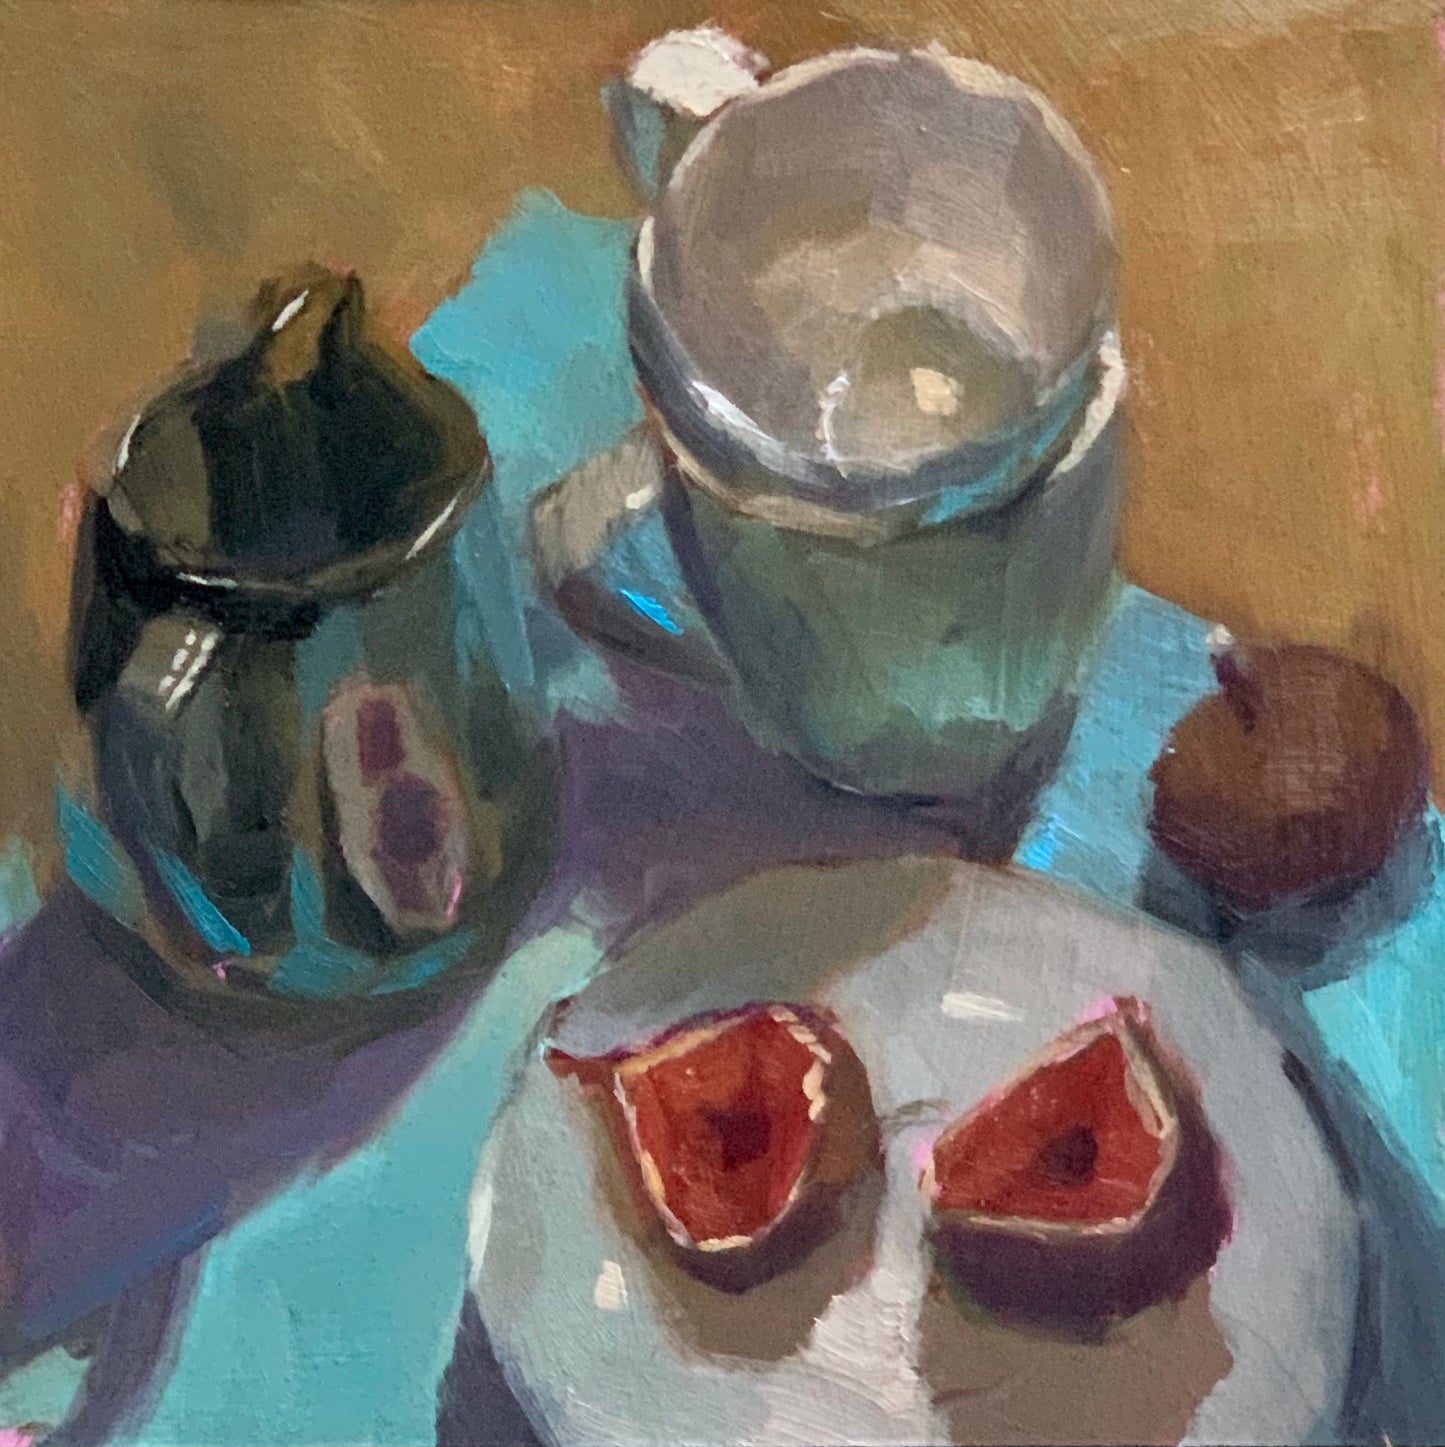 Cut up Figs - Small oil painting, 8 by 8 inches.